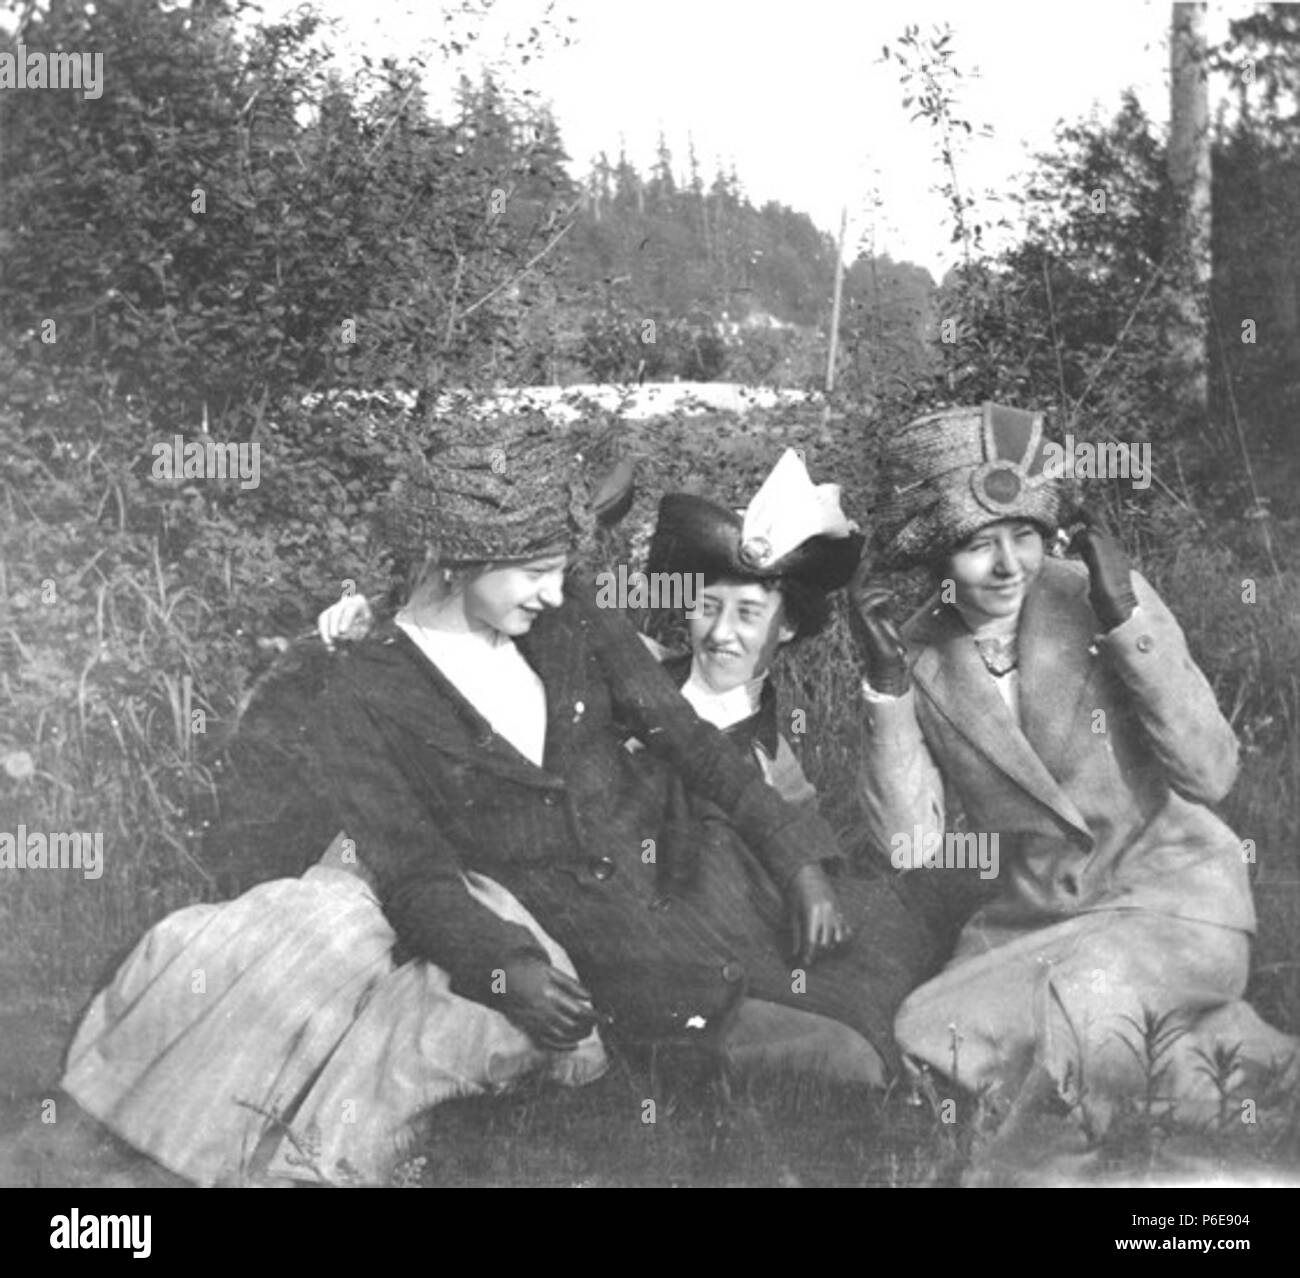 . English: Three women at Alki point, Washington, 1911 . English: Mildred Kiehl, the youngest daughter of H. Ambrose Kiehl, is the first on the left . Text from Kiehl log: Miriam, Mildred, Alta White. Alki Point. 1911 . Album 2.431 Subjects (LCSH): Kiehl, Miriam; Kiehl, Mildred; White, Alta; Women--Washington (State)--Alki Point; Alki Point (Wash.); West Seattle (Seattle, Wash.) Concepts: Women; Leisure  . 1911 77 Three women at Alki point, Washington, 1911 (KIEHL 109) Stock Photo